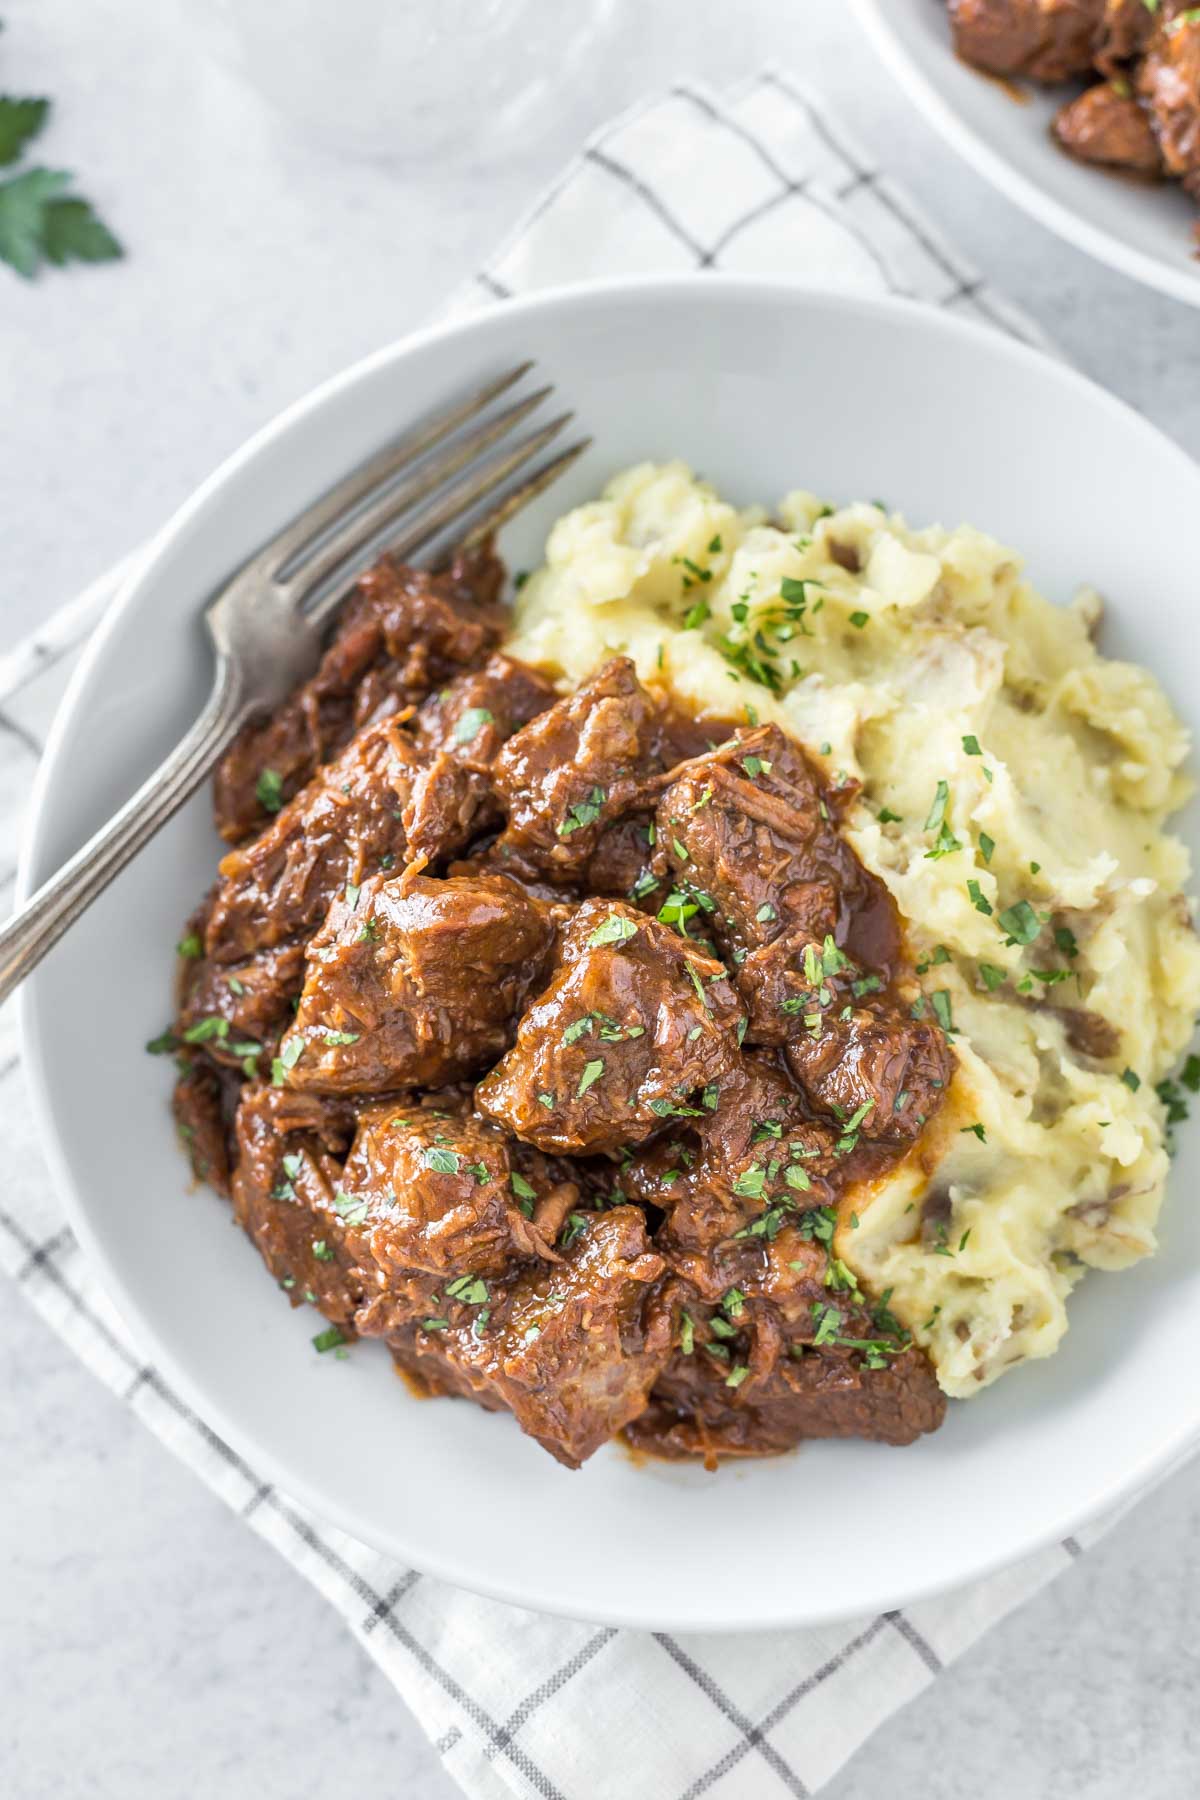 overhead shot of Guinness braised beef in a bowl with mashed potatoes and a vintage fork, on a gray background with a second bowl to the side and a gray and white grid patterned napkin and a sprig of fresh parsley